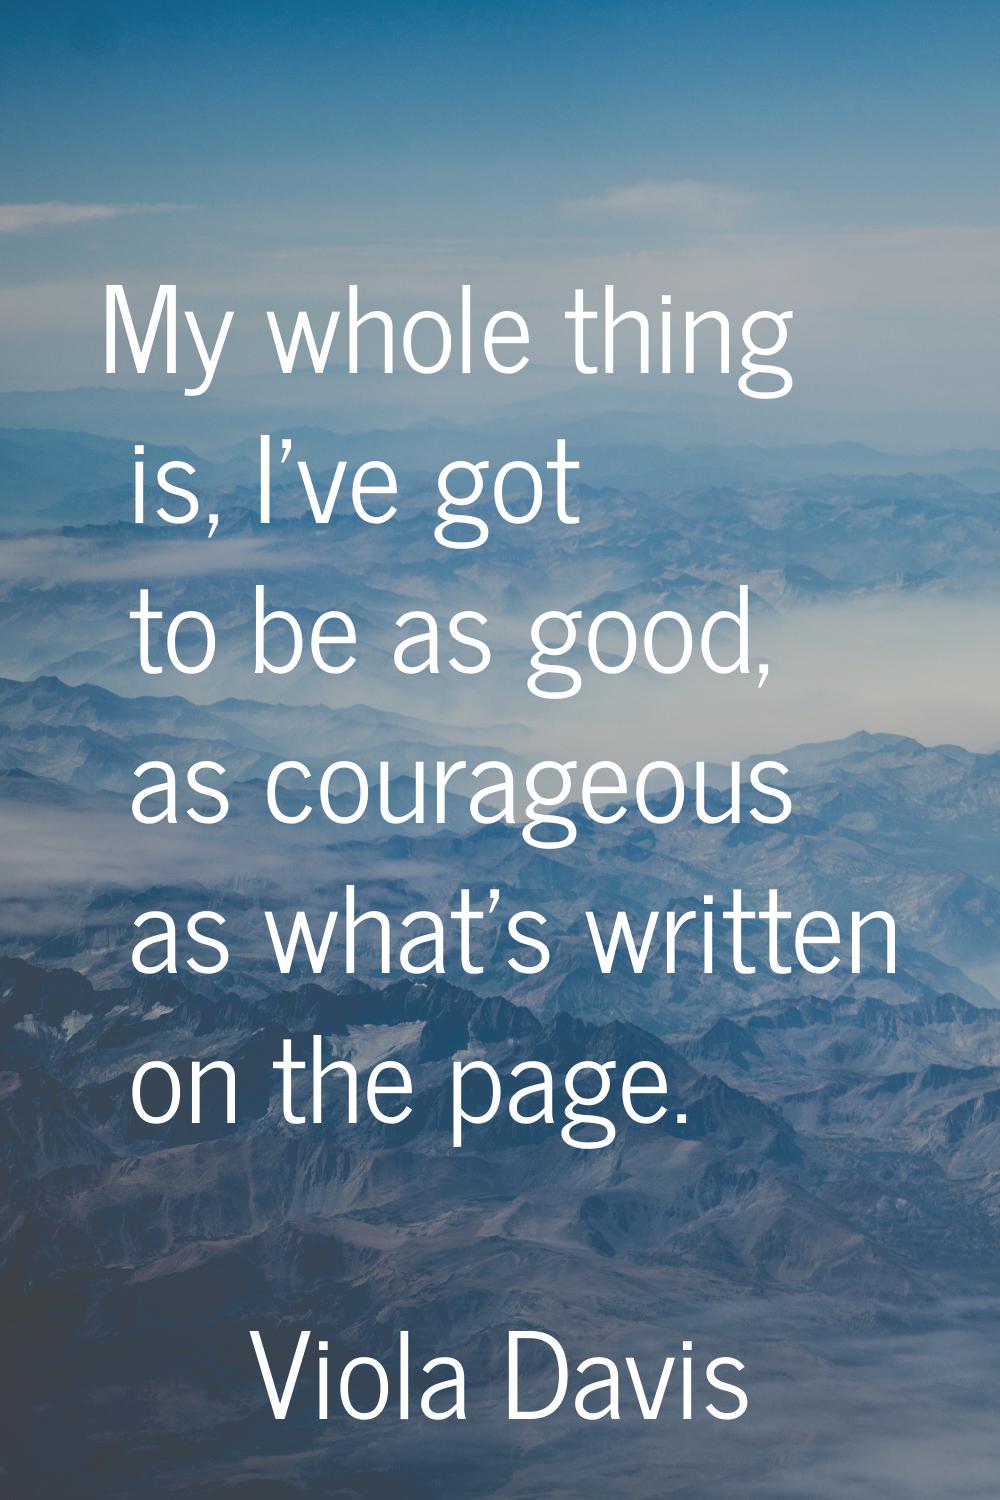 My whole thing is, I've got to be as good, as courageous as what's written on the page.